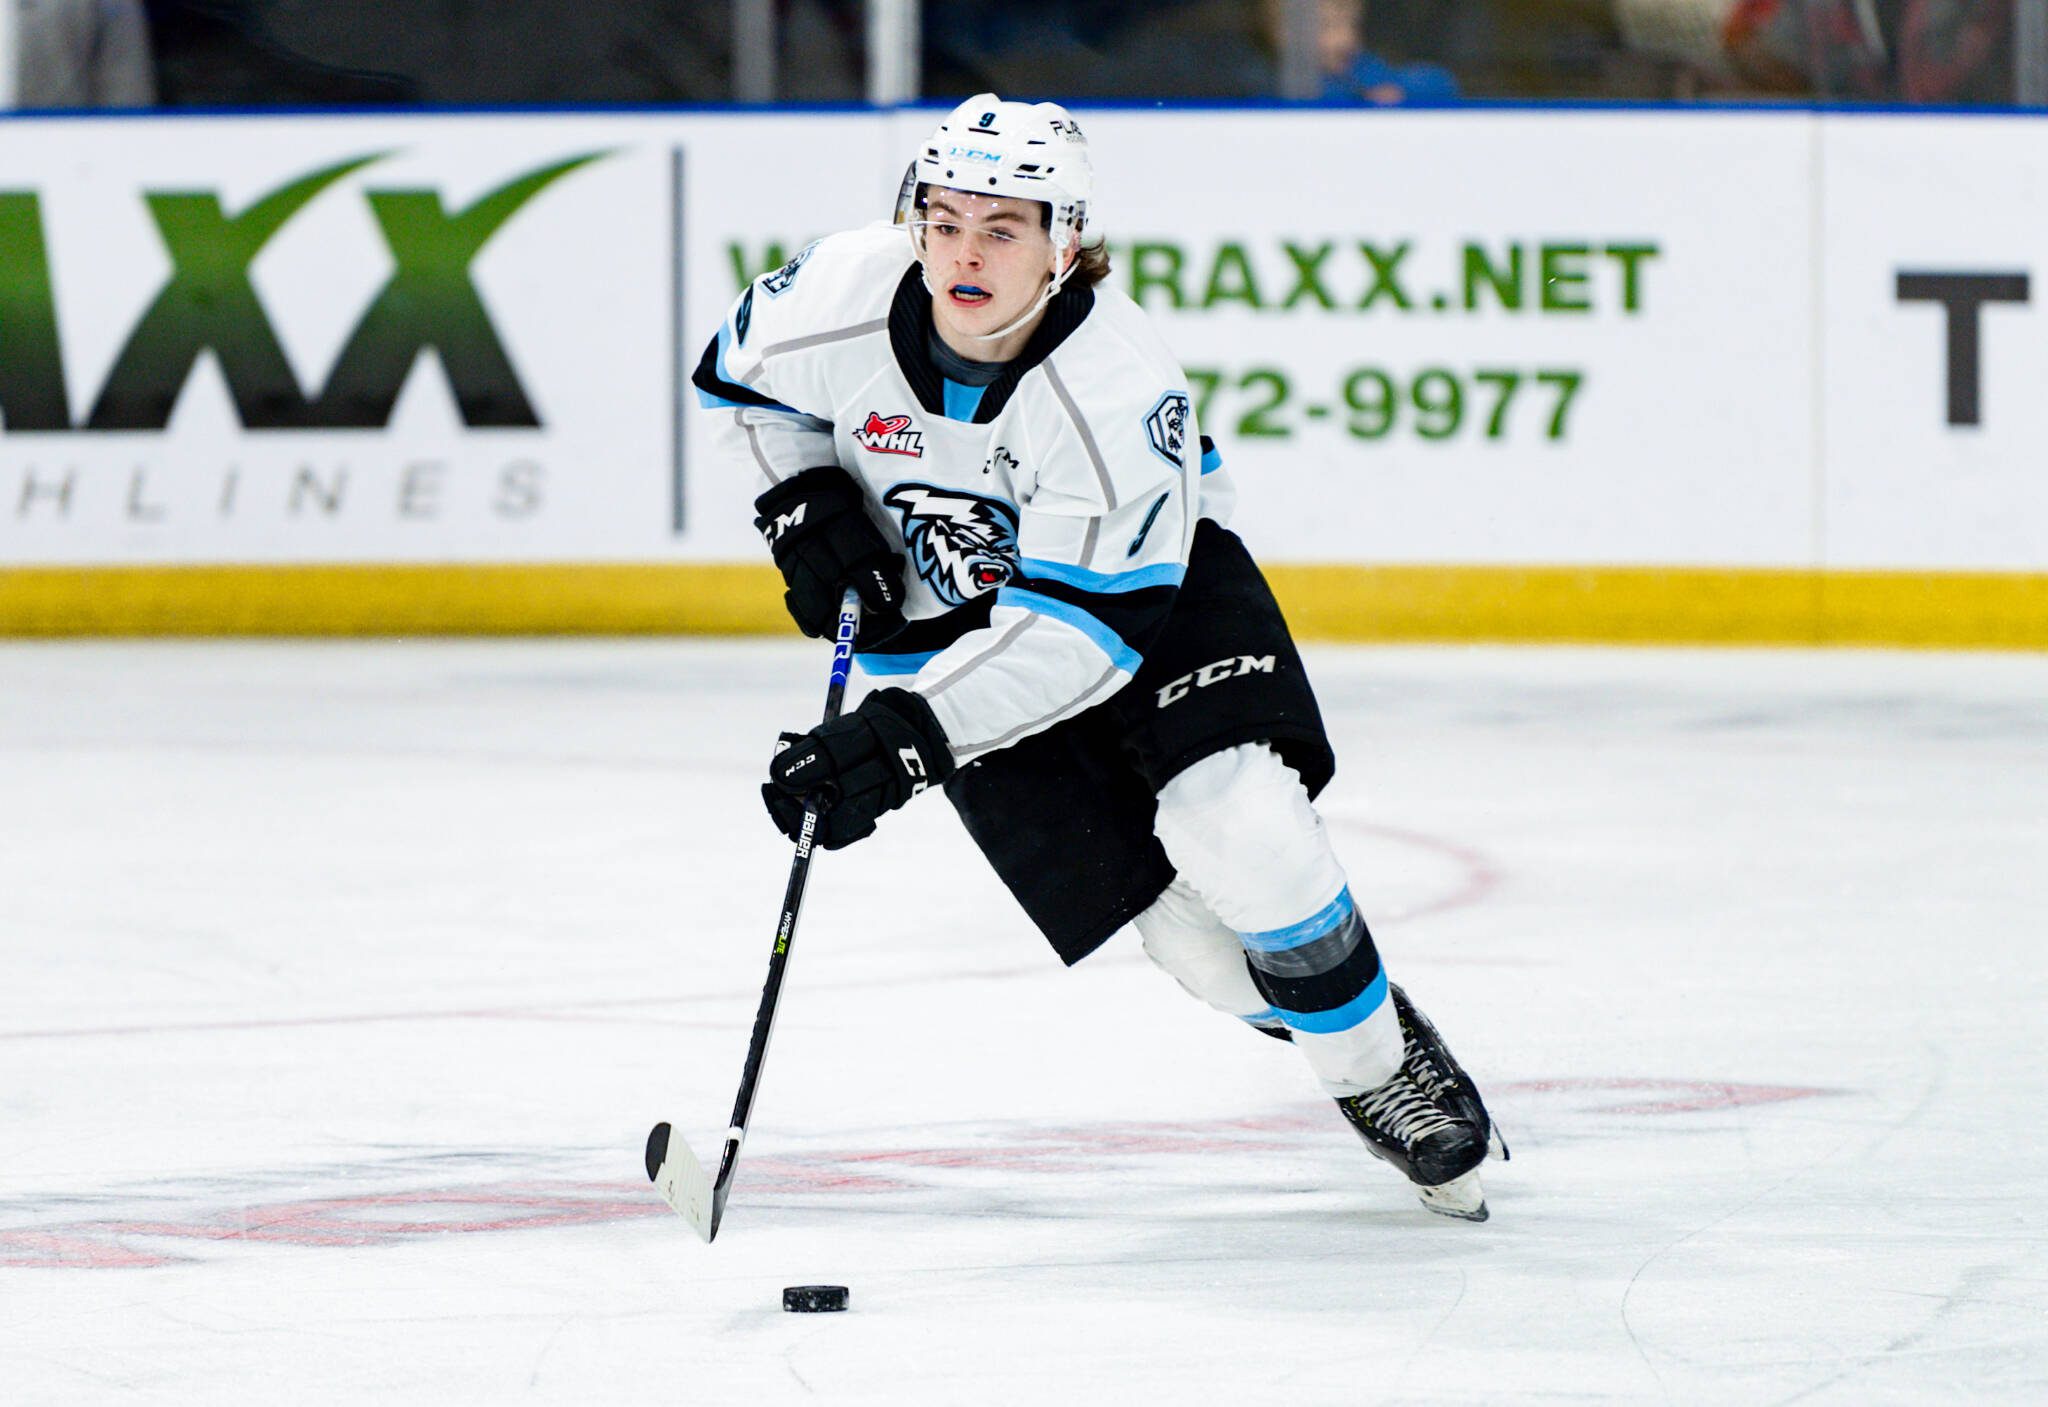 Standout forward Zach Benson is part of the Winnipeg Ice franchise that is relocating to Wenatchee. (Erica Perreaux photo)